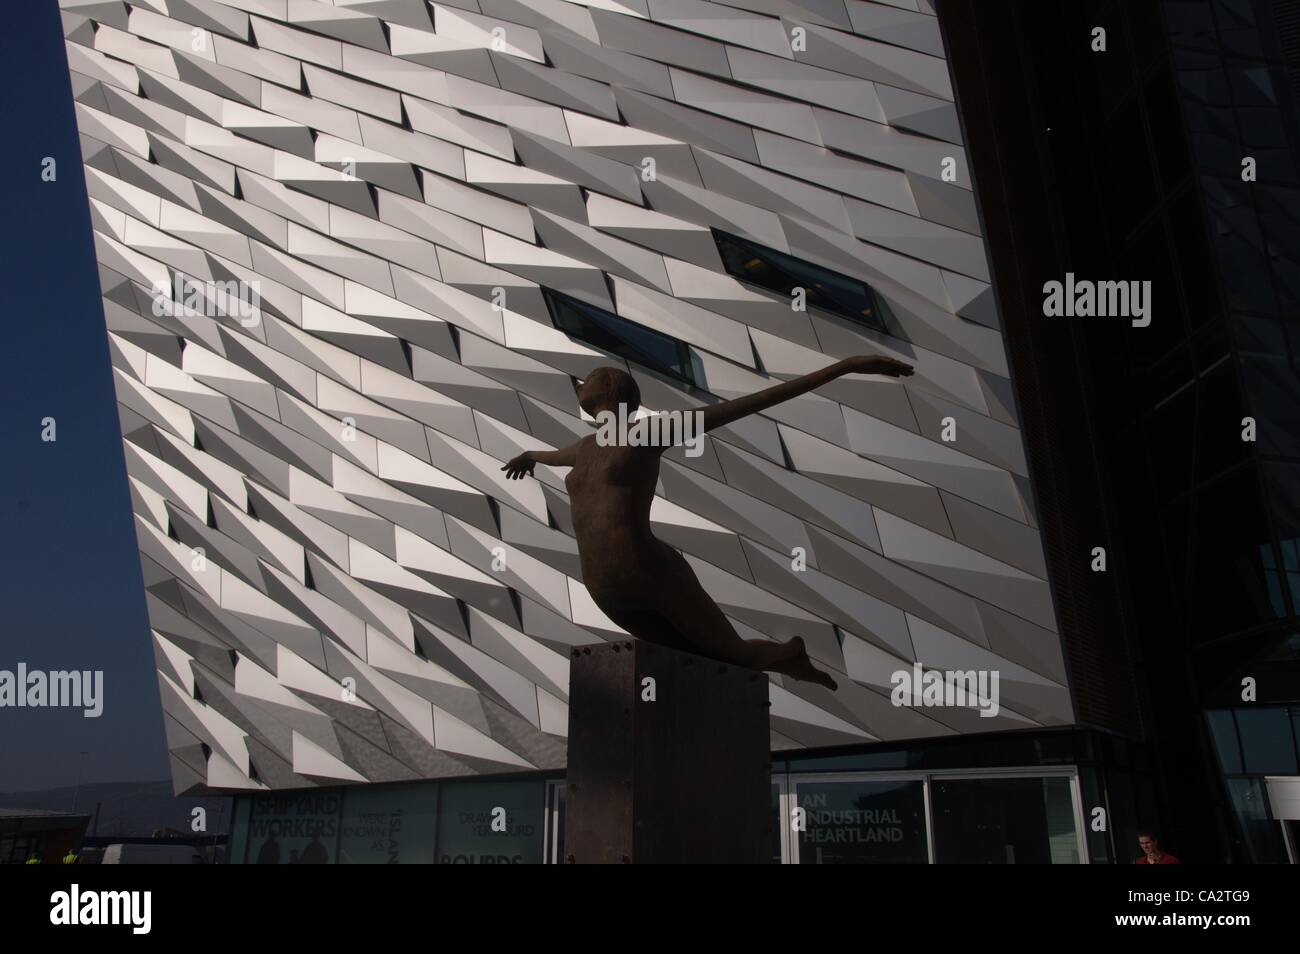 Statue of a mermaid at the entrance to Titanic Belfast visitor centre, Titanic Quarter, Belfast, Northern Ireland. 27 March 2012 Stock Photo